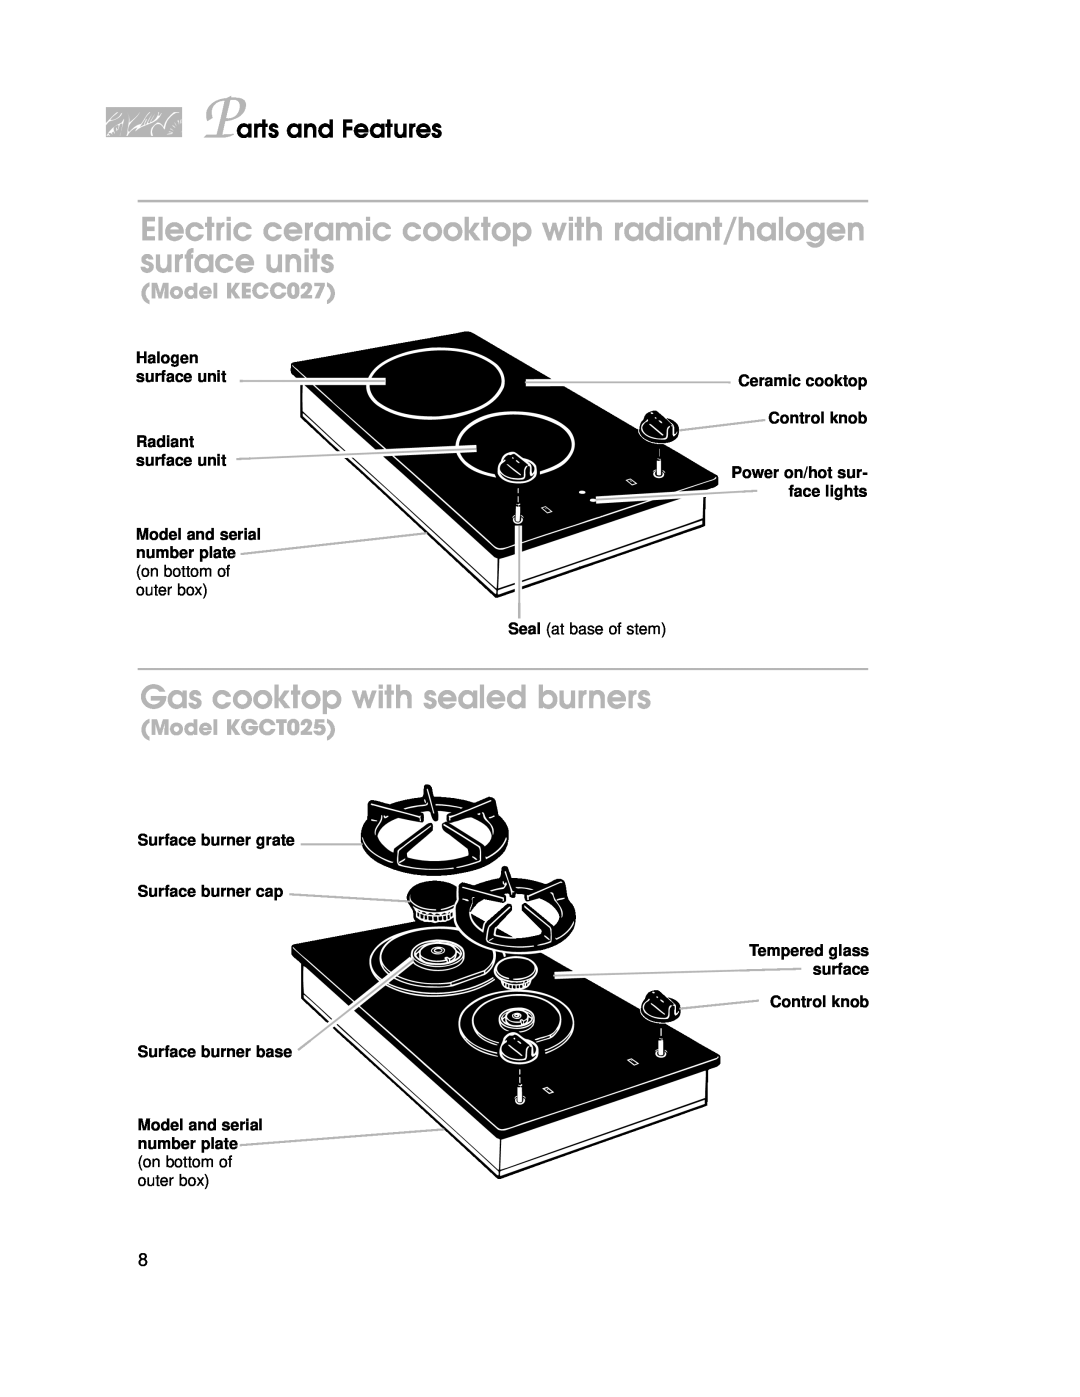 KitchenAid KGCT025 Electric ceramic cooktop with radiant/halogen surface units, Gas cooktop with sealed burners, Halogen 